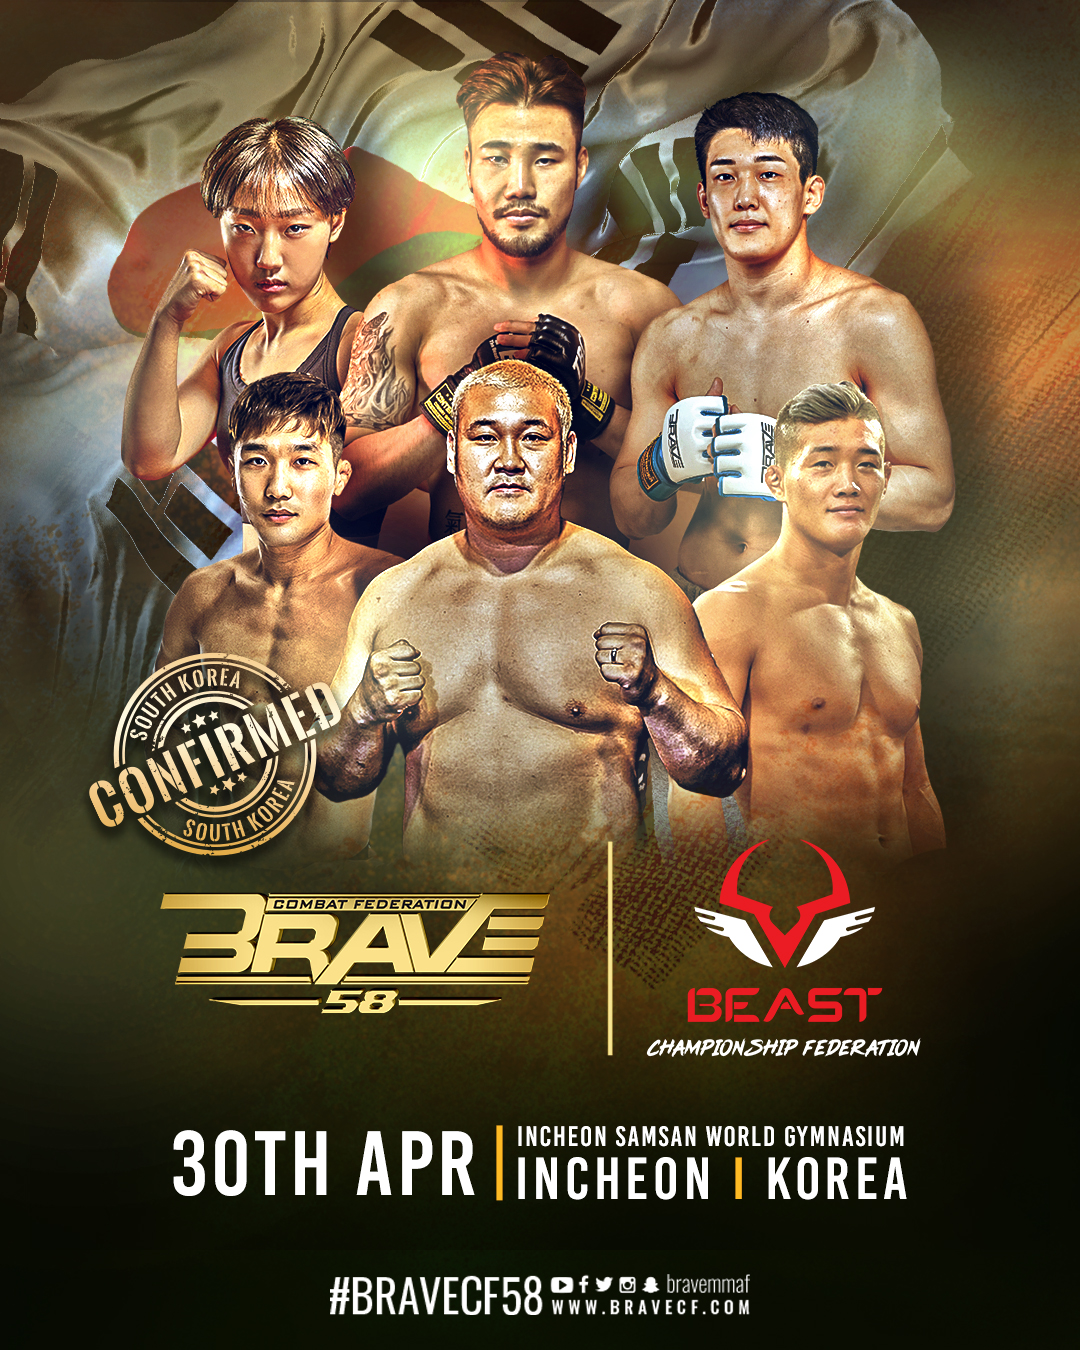 Four Korean Fighters To Watch Out For At BRAVE CF 58